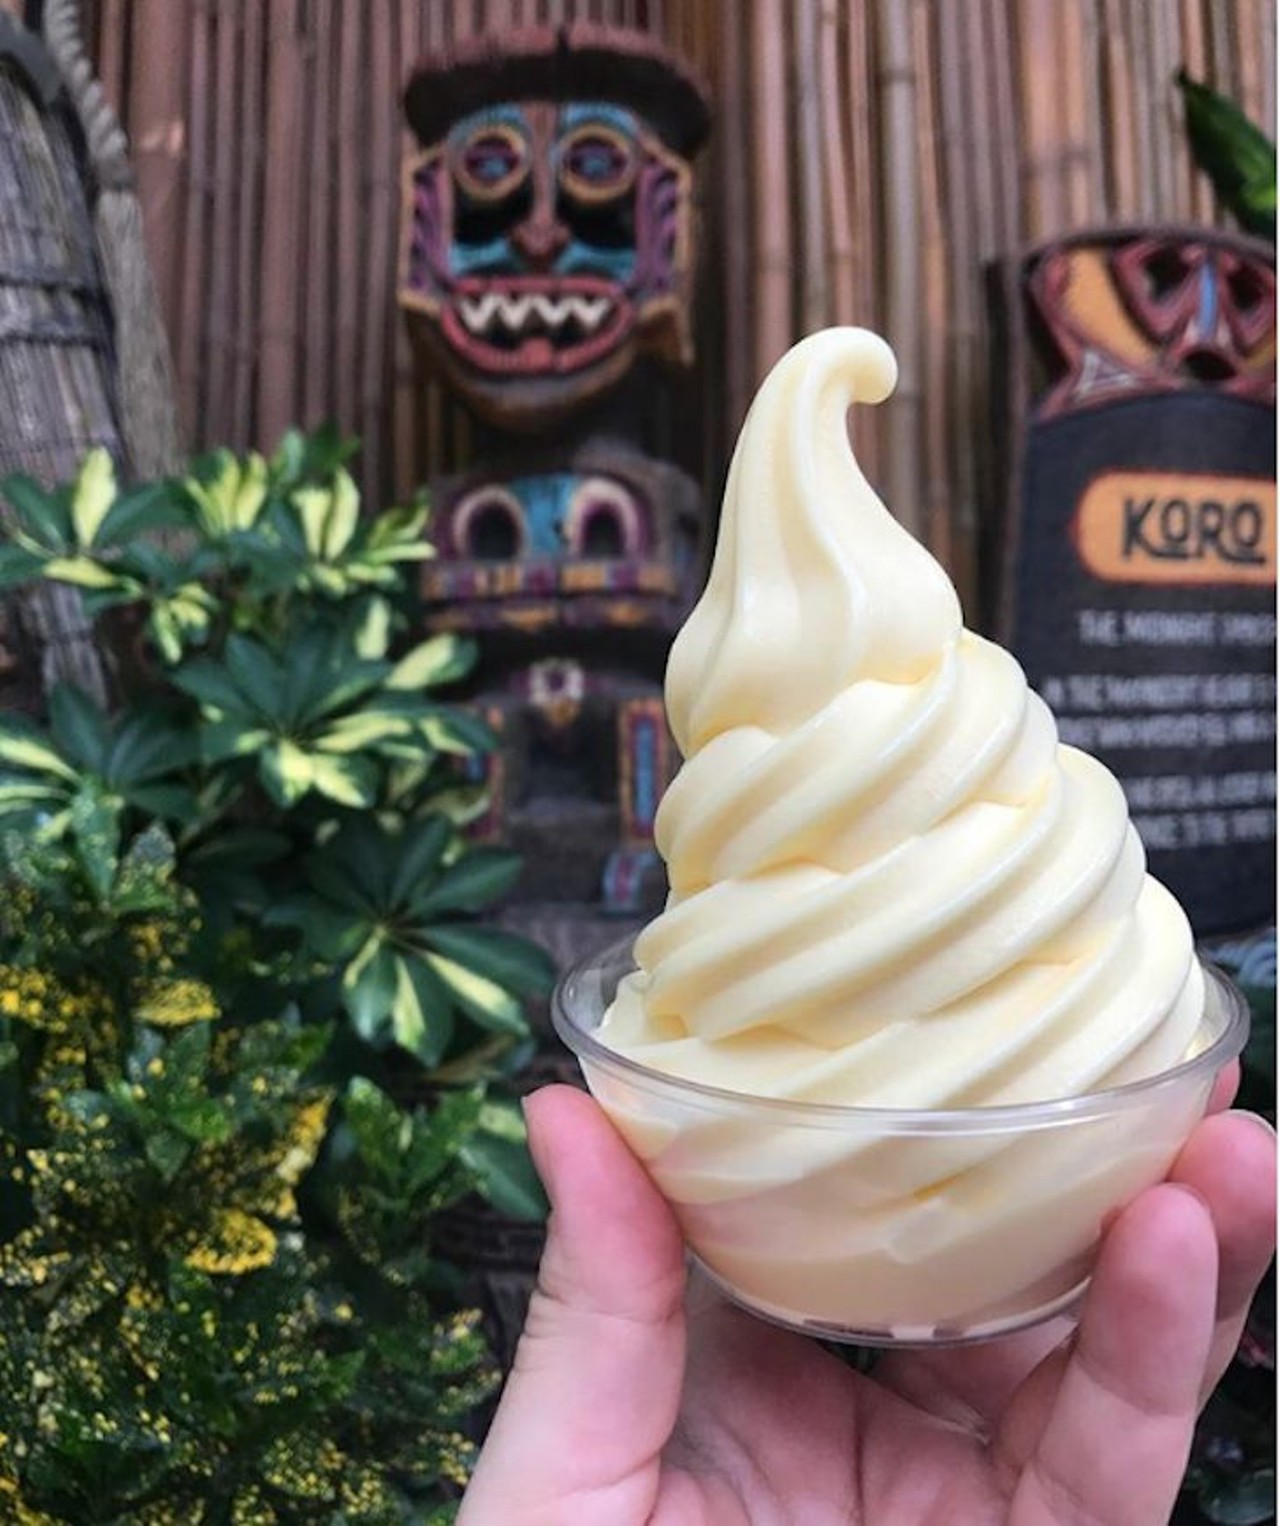 Dole Whip at Disney
Adventure Island in Walt Disney World&#146;s Adventure Island 
A favorite for Disney regulars, the Dole Whip is the pinnacle of soft-serve heaven; a frozen, non-dairy treat blended in a pineapple and vanilla swirl. Try the cup or upgrade to the pineapple float.
Photo via captainpeggyrogers/Instagram